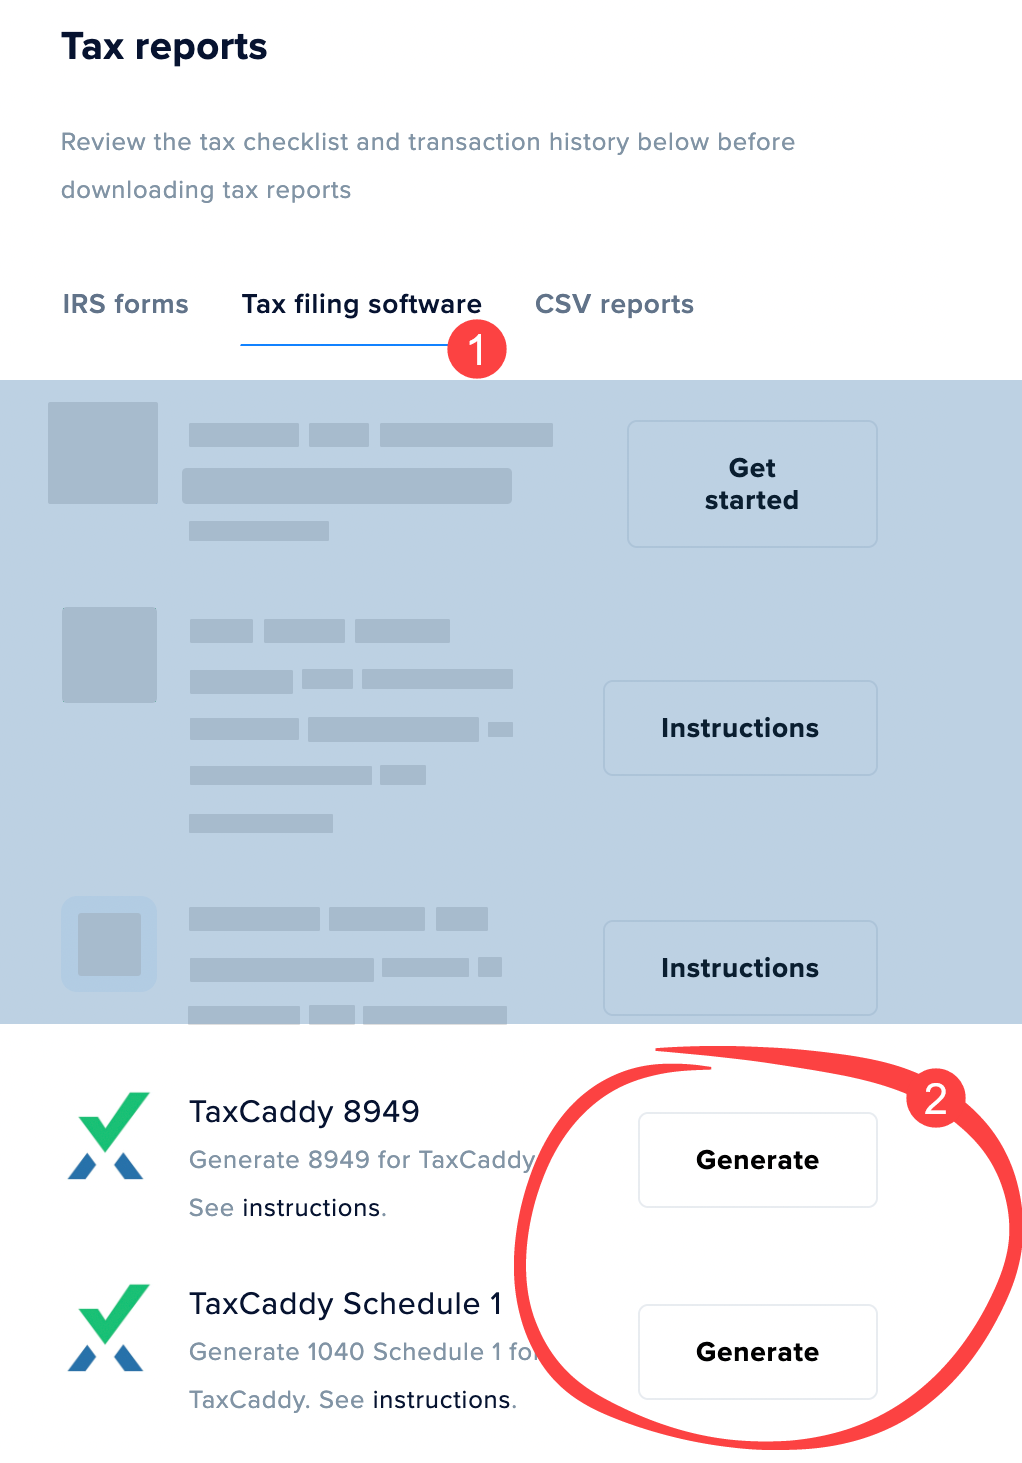 Generate_tax_forms_for_TaxCaddy_in_CoinTracker_-_v3-3.png